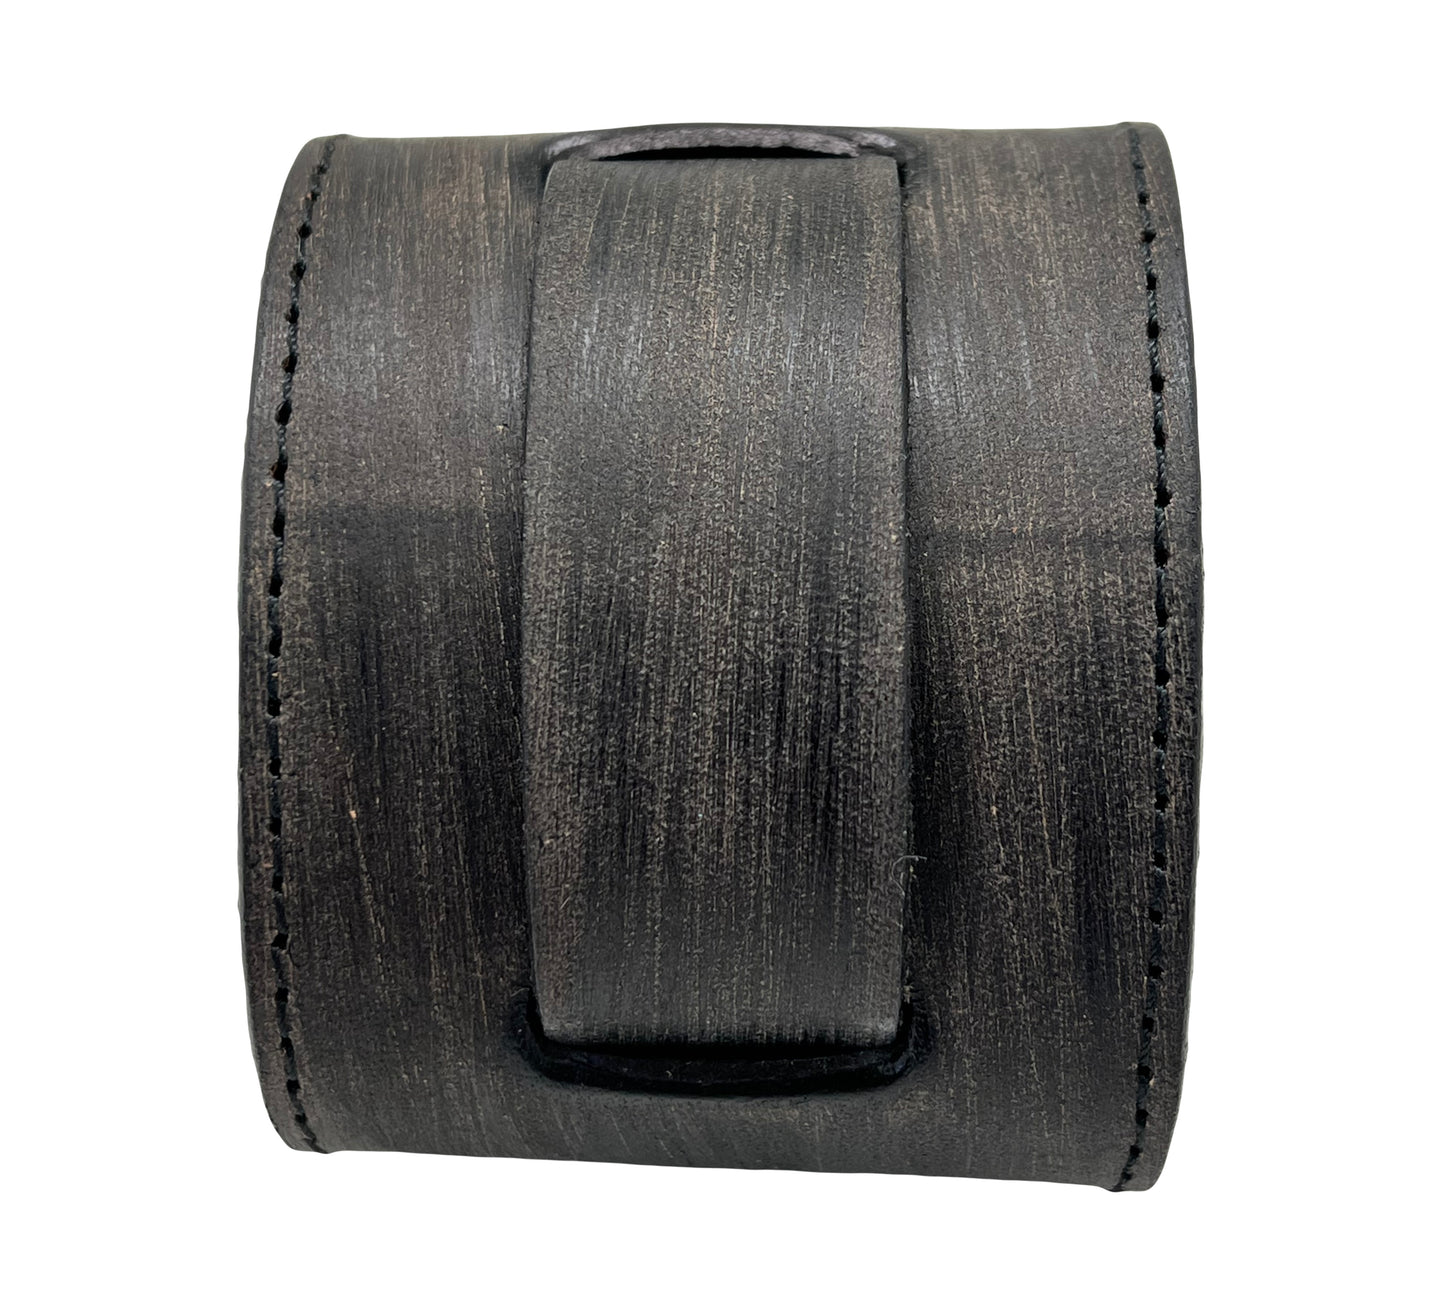 Stitched Distressed Charcoal Leather Wide Cuff